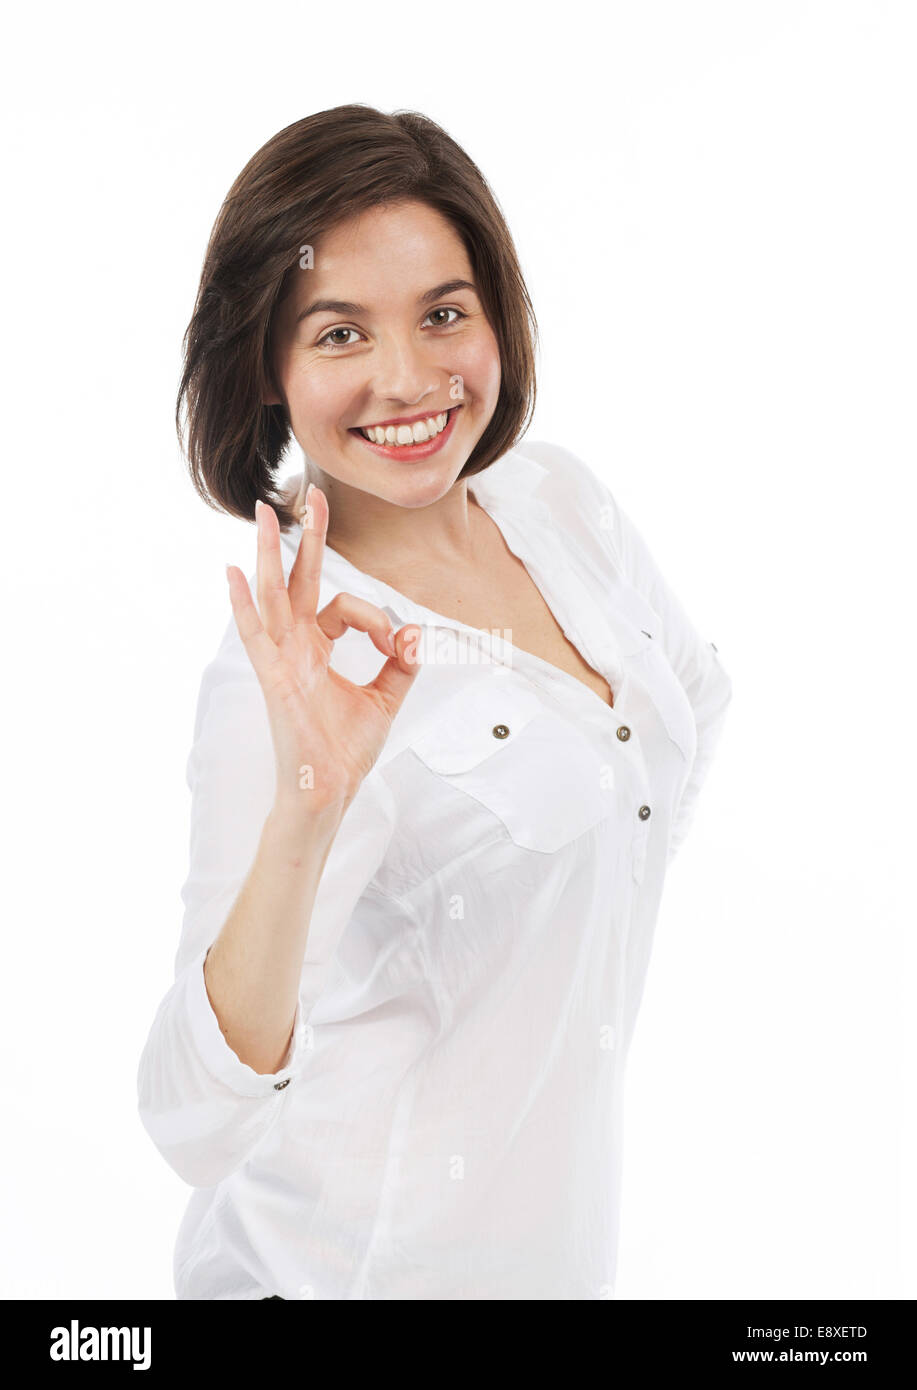 Portrait of smiling woman having a positive gesture, isolated on white Stock Photo